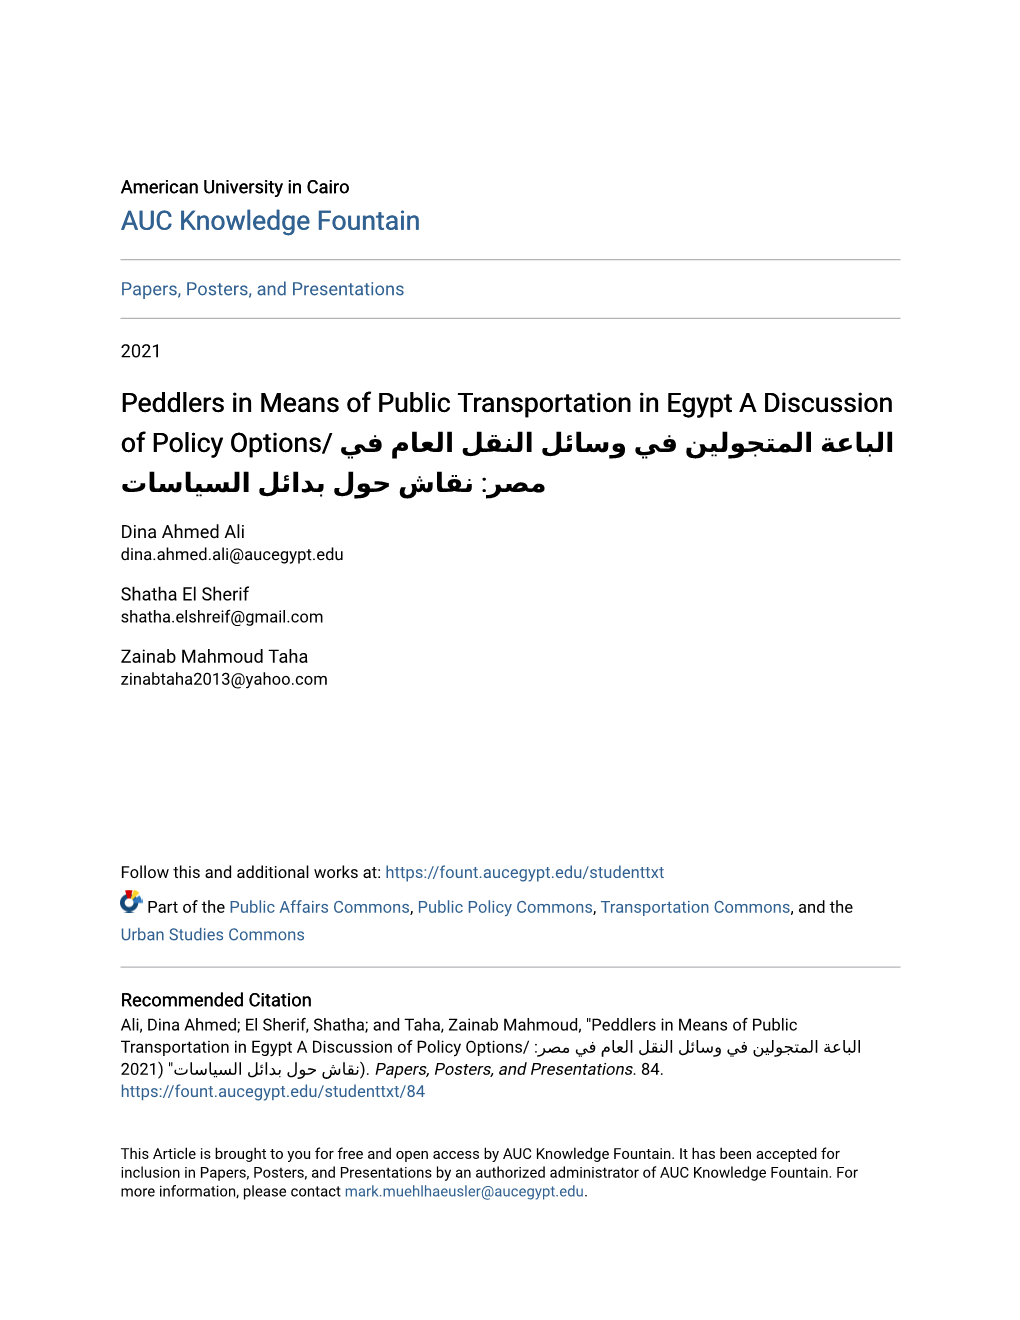 Peddlers in Means of Public Transportation in Egypt a Discussion of Policy Options